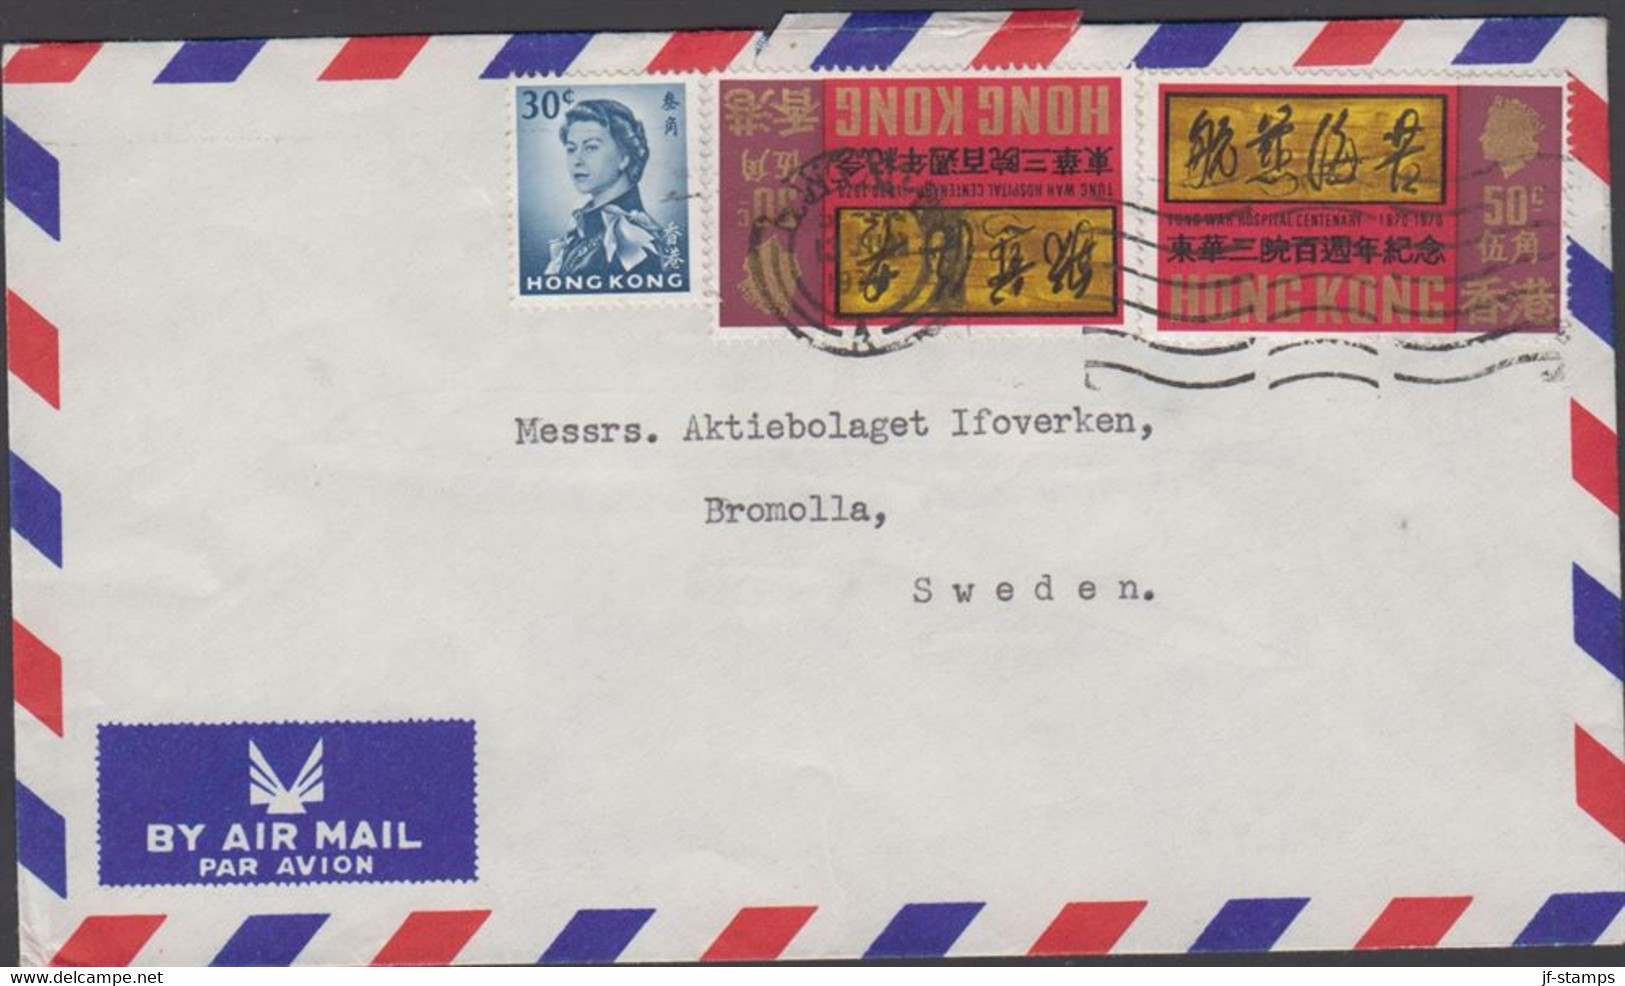 1970. HONG KONG. 30 C Elizabeth + 2 Ex 50 C TUNG WAH HOSPITAL  On AIR MAIL Cover To Bromolla... (Michel 251+) - JF427103 - Lettres & Documents